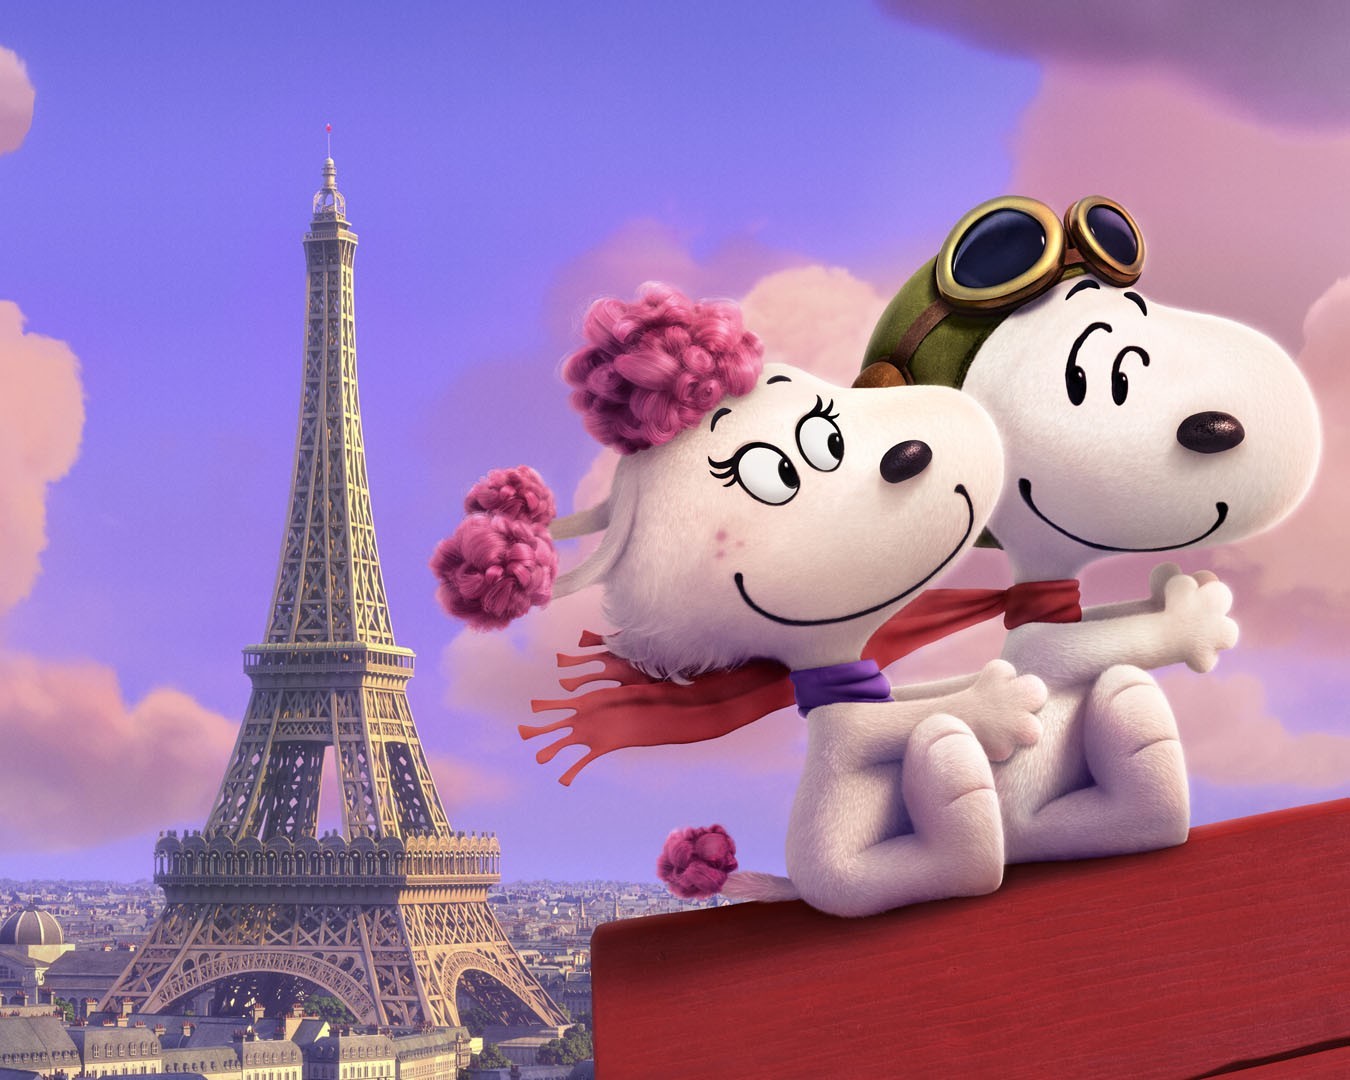 Fifi and Snoopy from 20th Century Fox's Peanuts (2015)